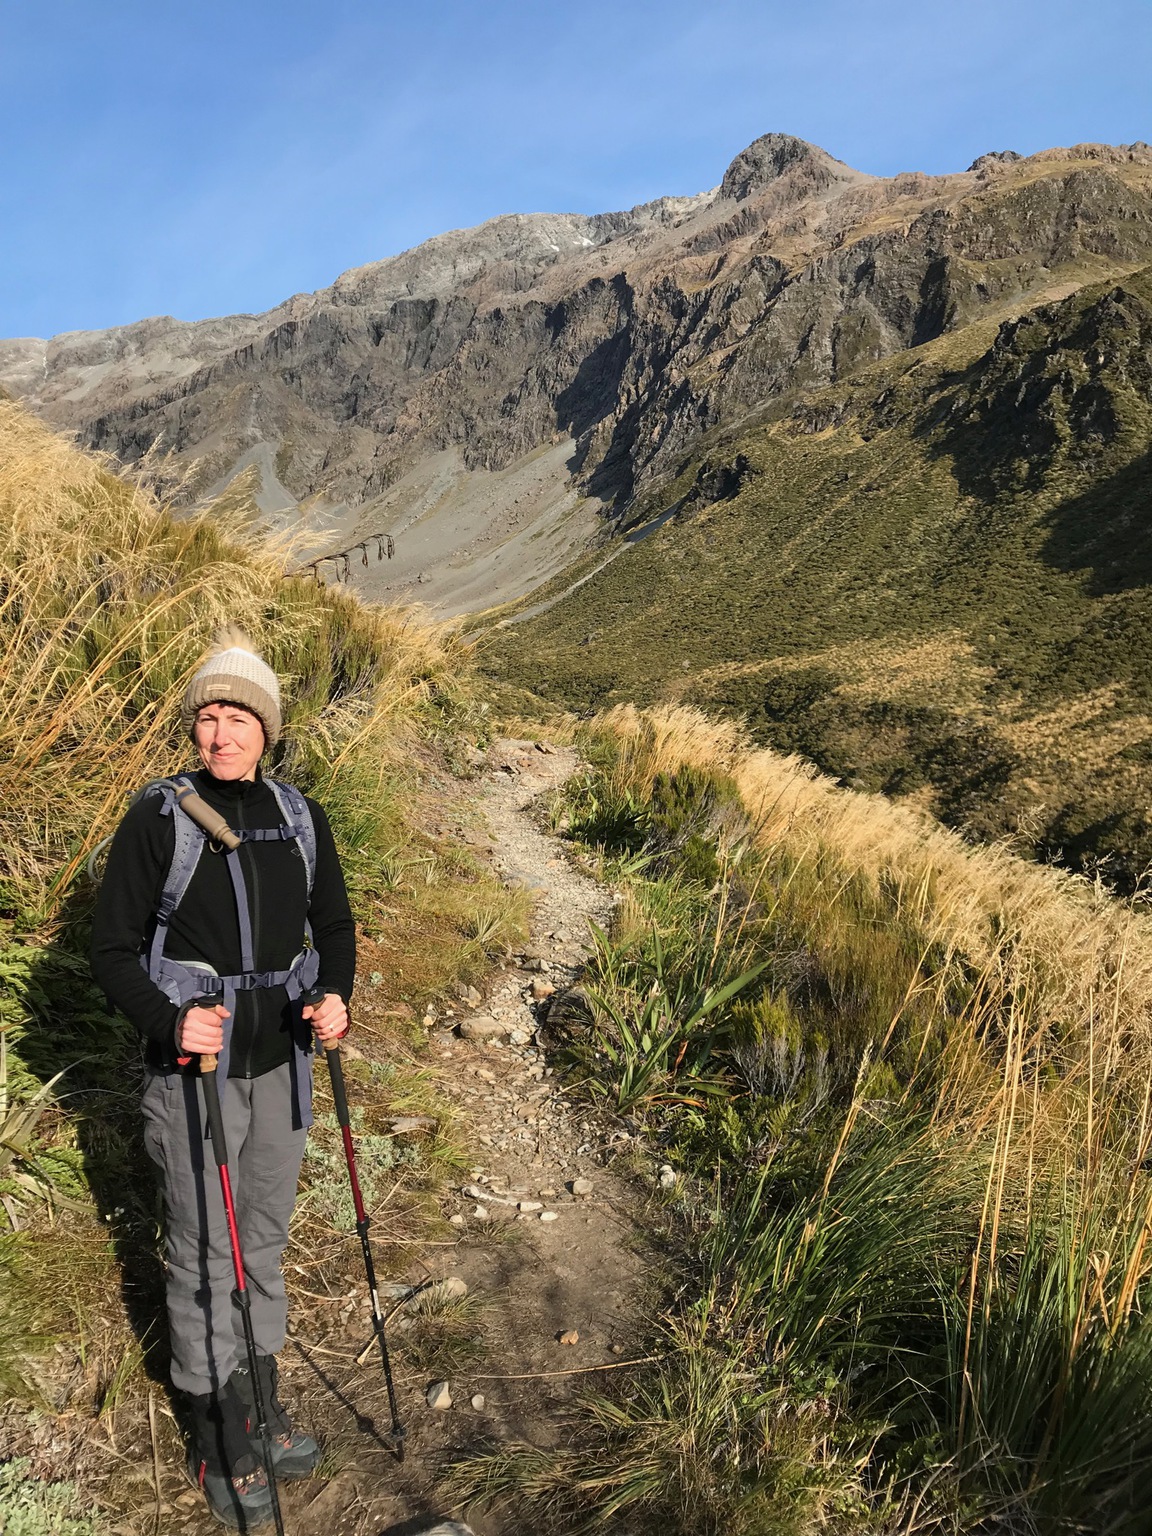 Delphine poses near the start of hike up the Otira valley. The peak on the ridge is a false peak, with Mt Philistine further behind and not visible from the start of the climb.